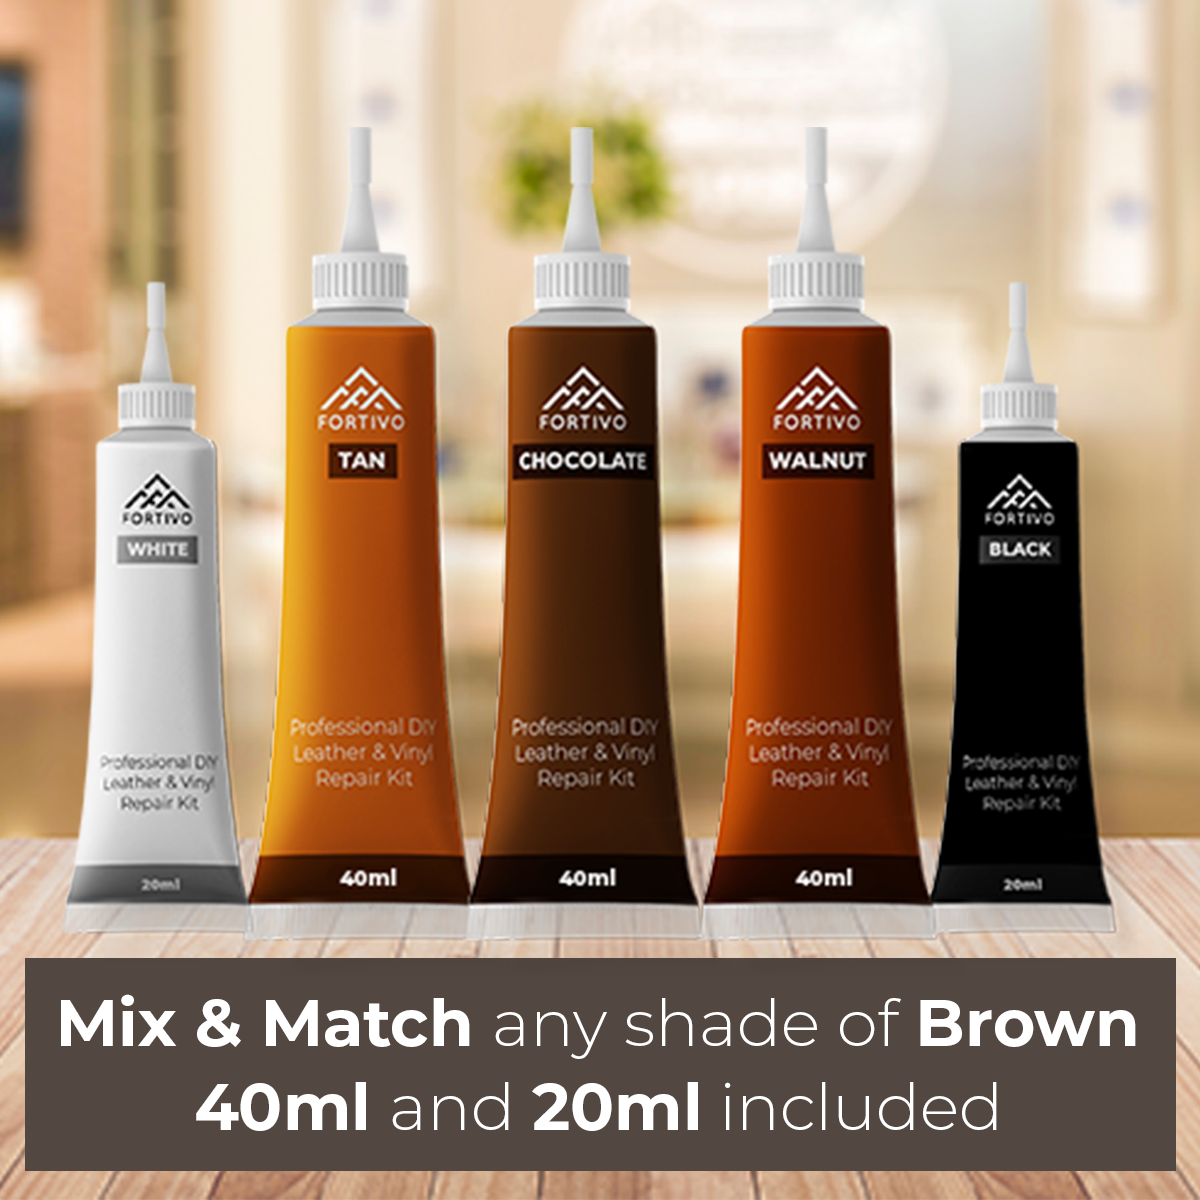 Mix and match any shade of brown vinyl repair kit